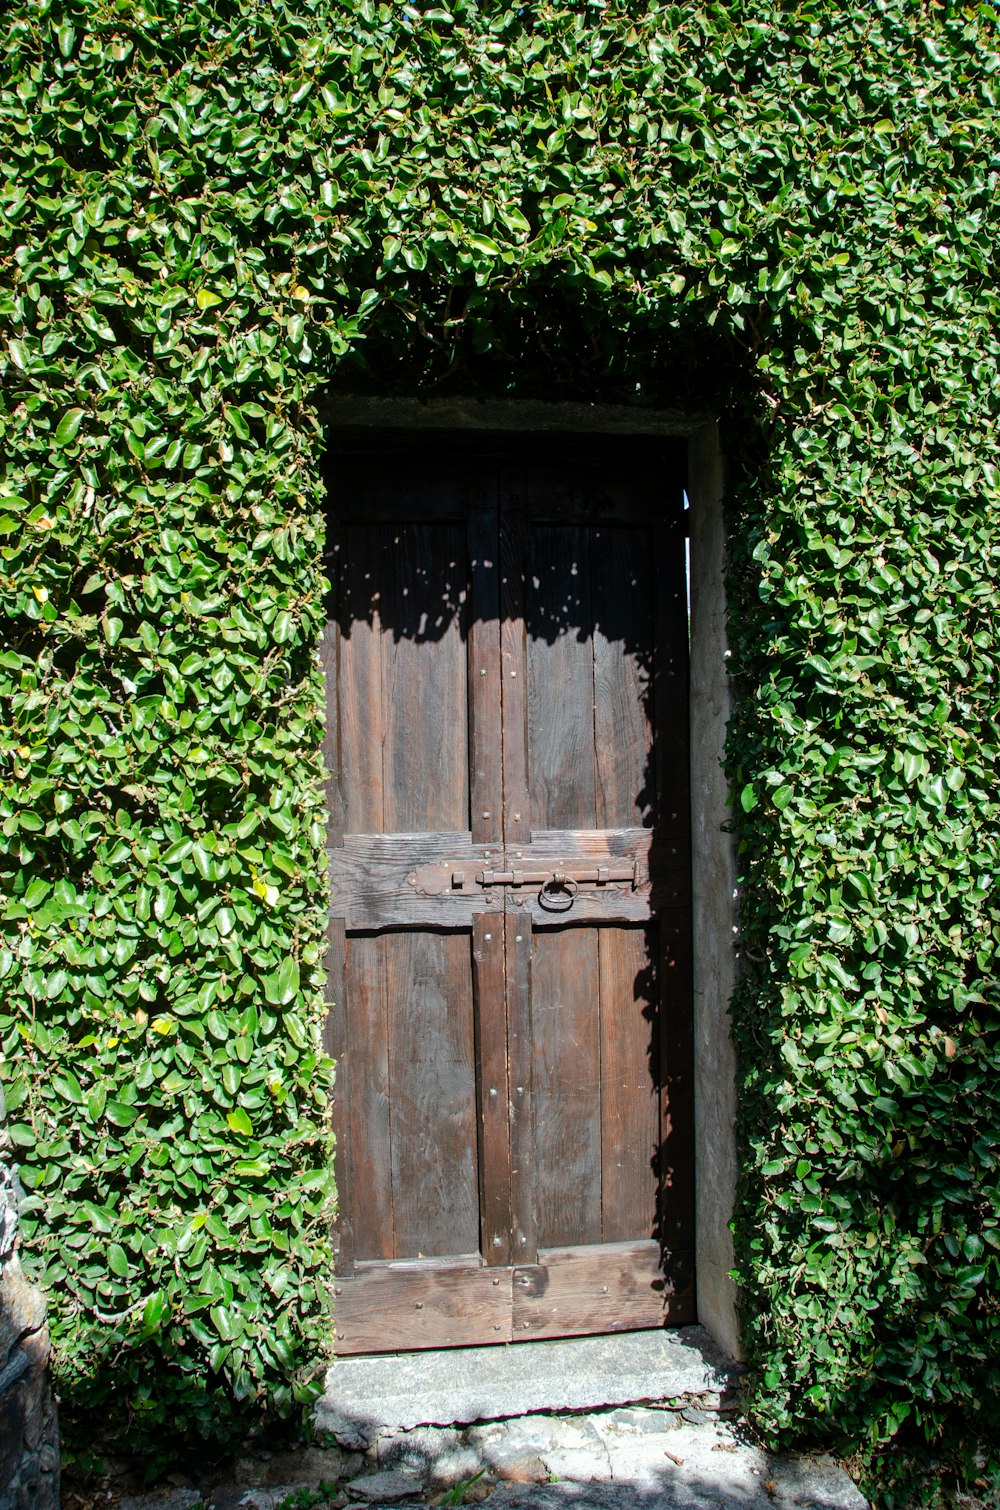 a wooden door surrounded by green plants